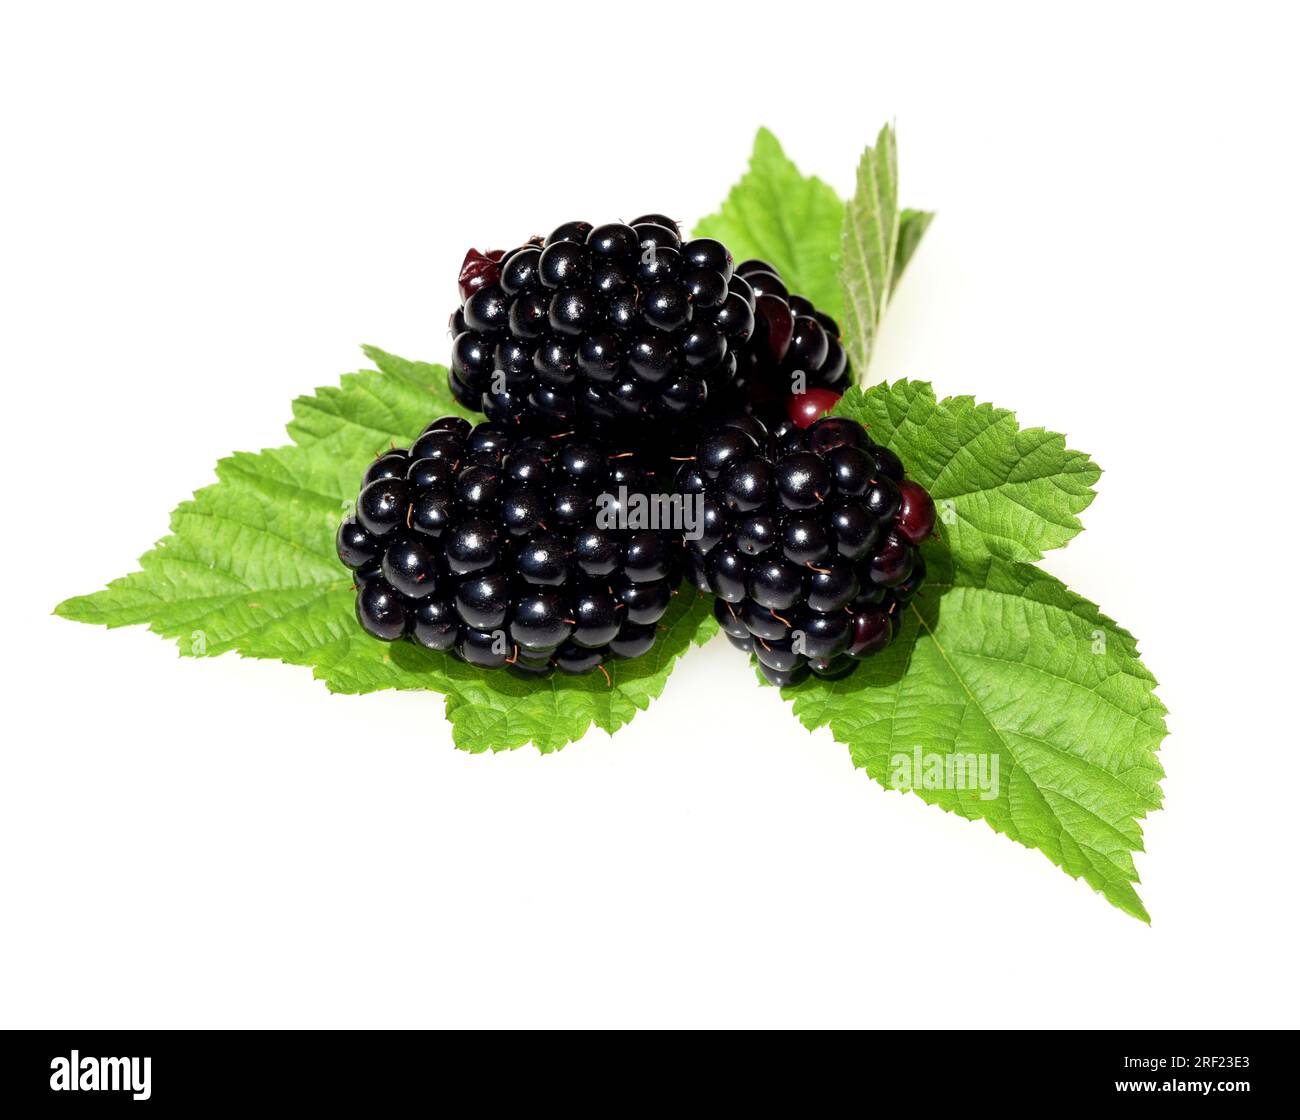 Blackberries, Rubus fructicosa, is a tasty berry plant with black berries Stock Photo